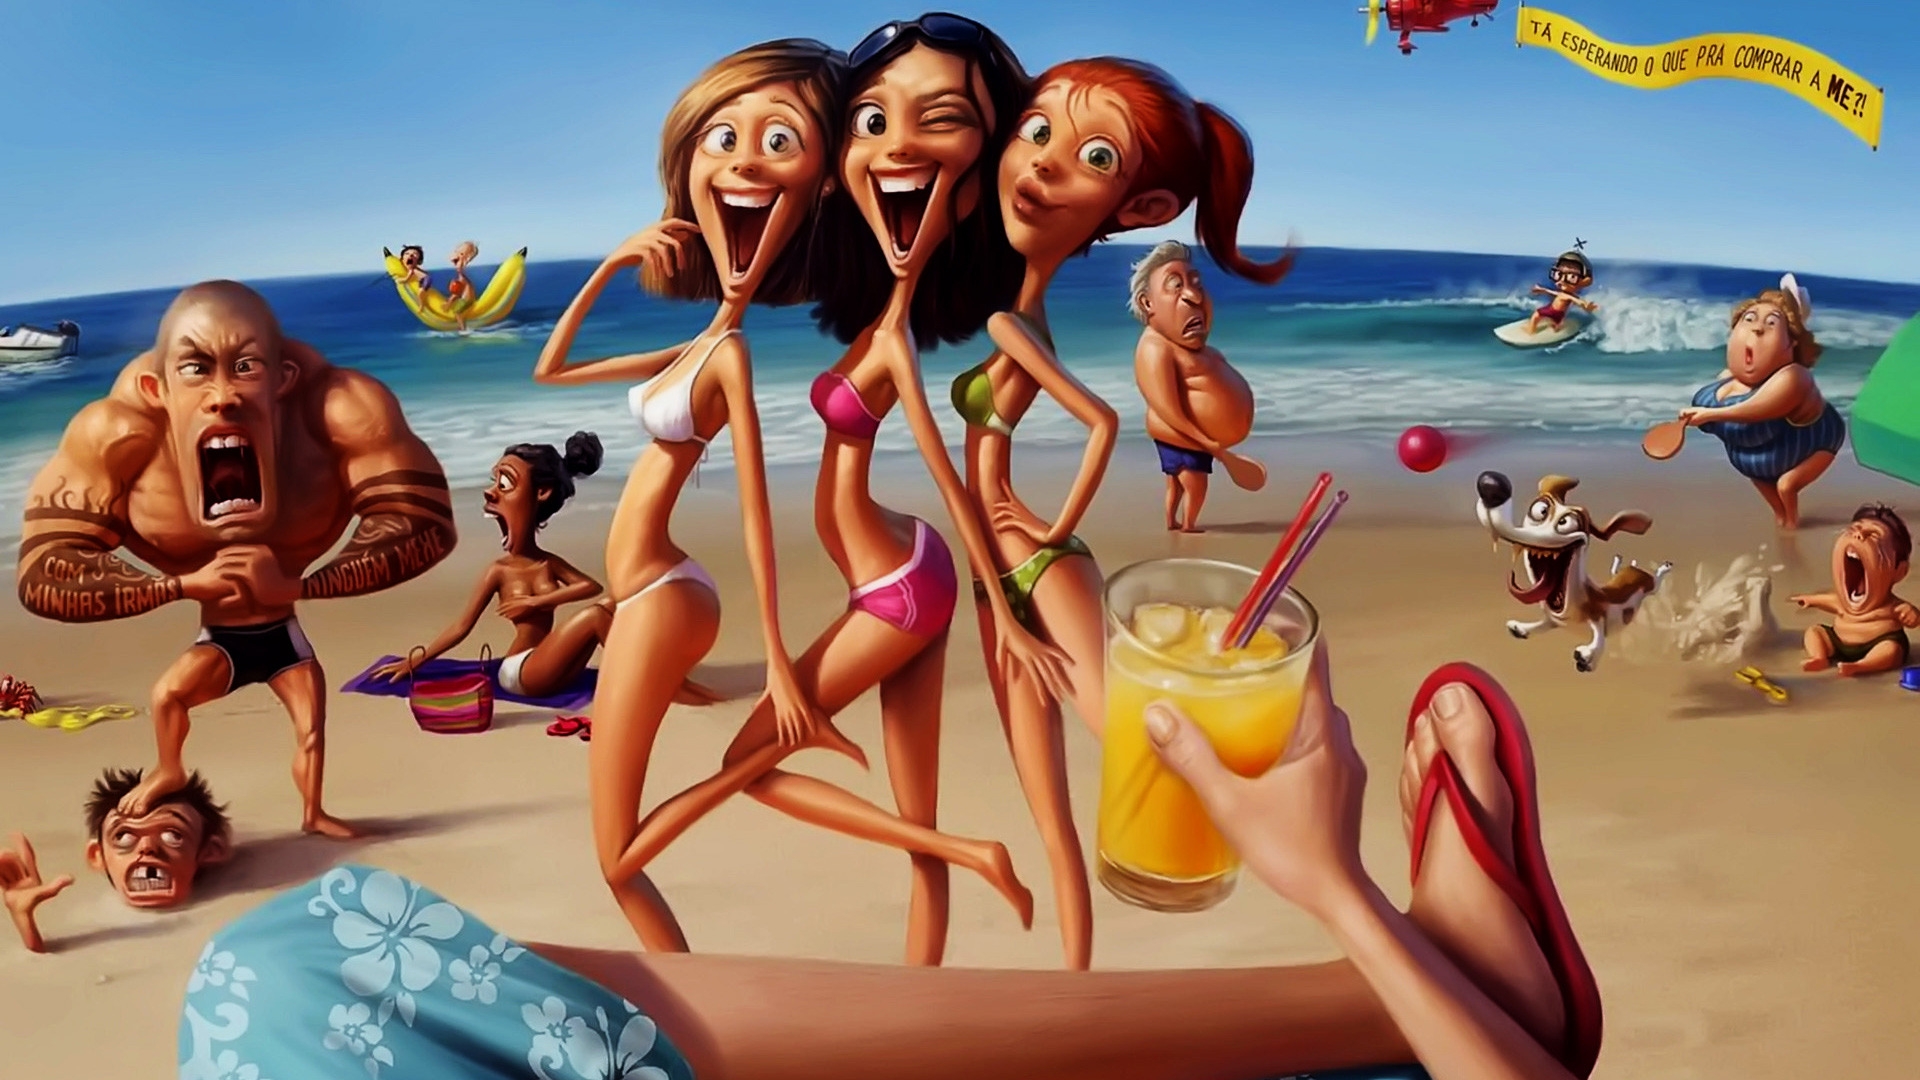 Funny Cartoon Poster for 1920 x 1080 HDTV 1080p resolution